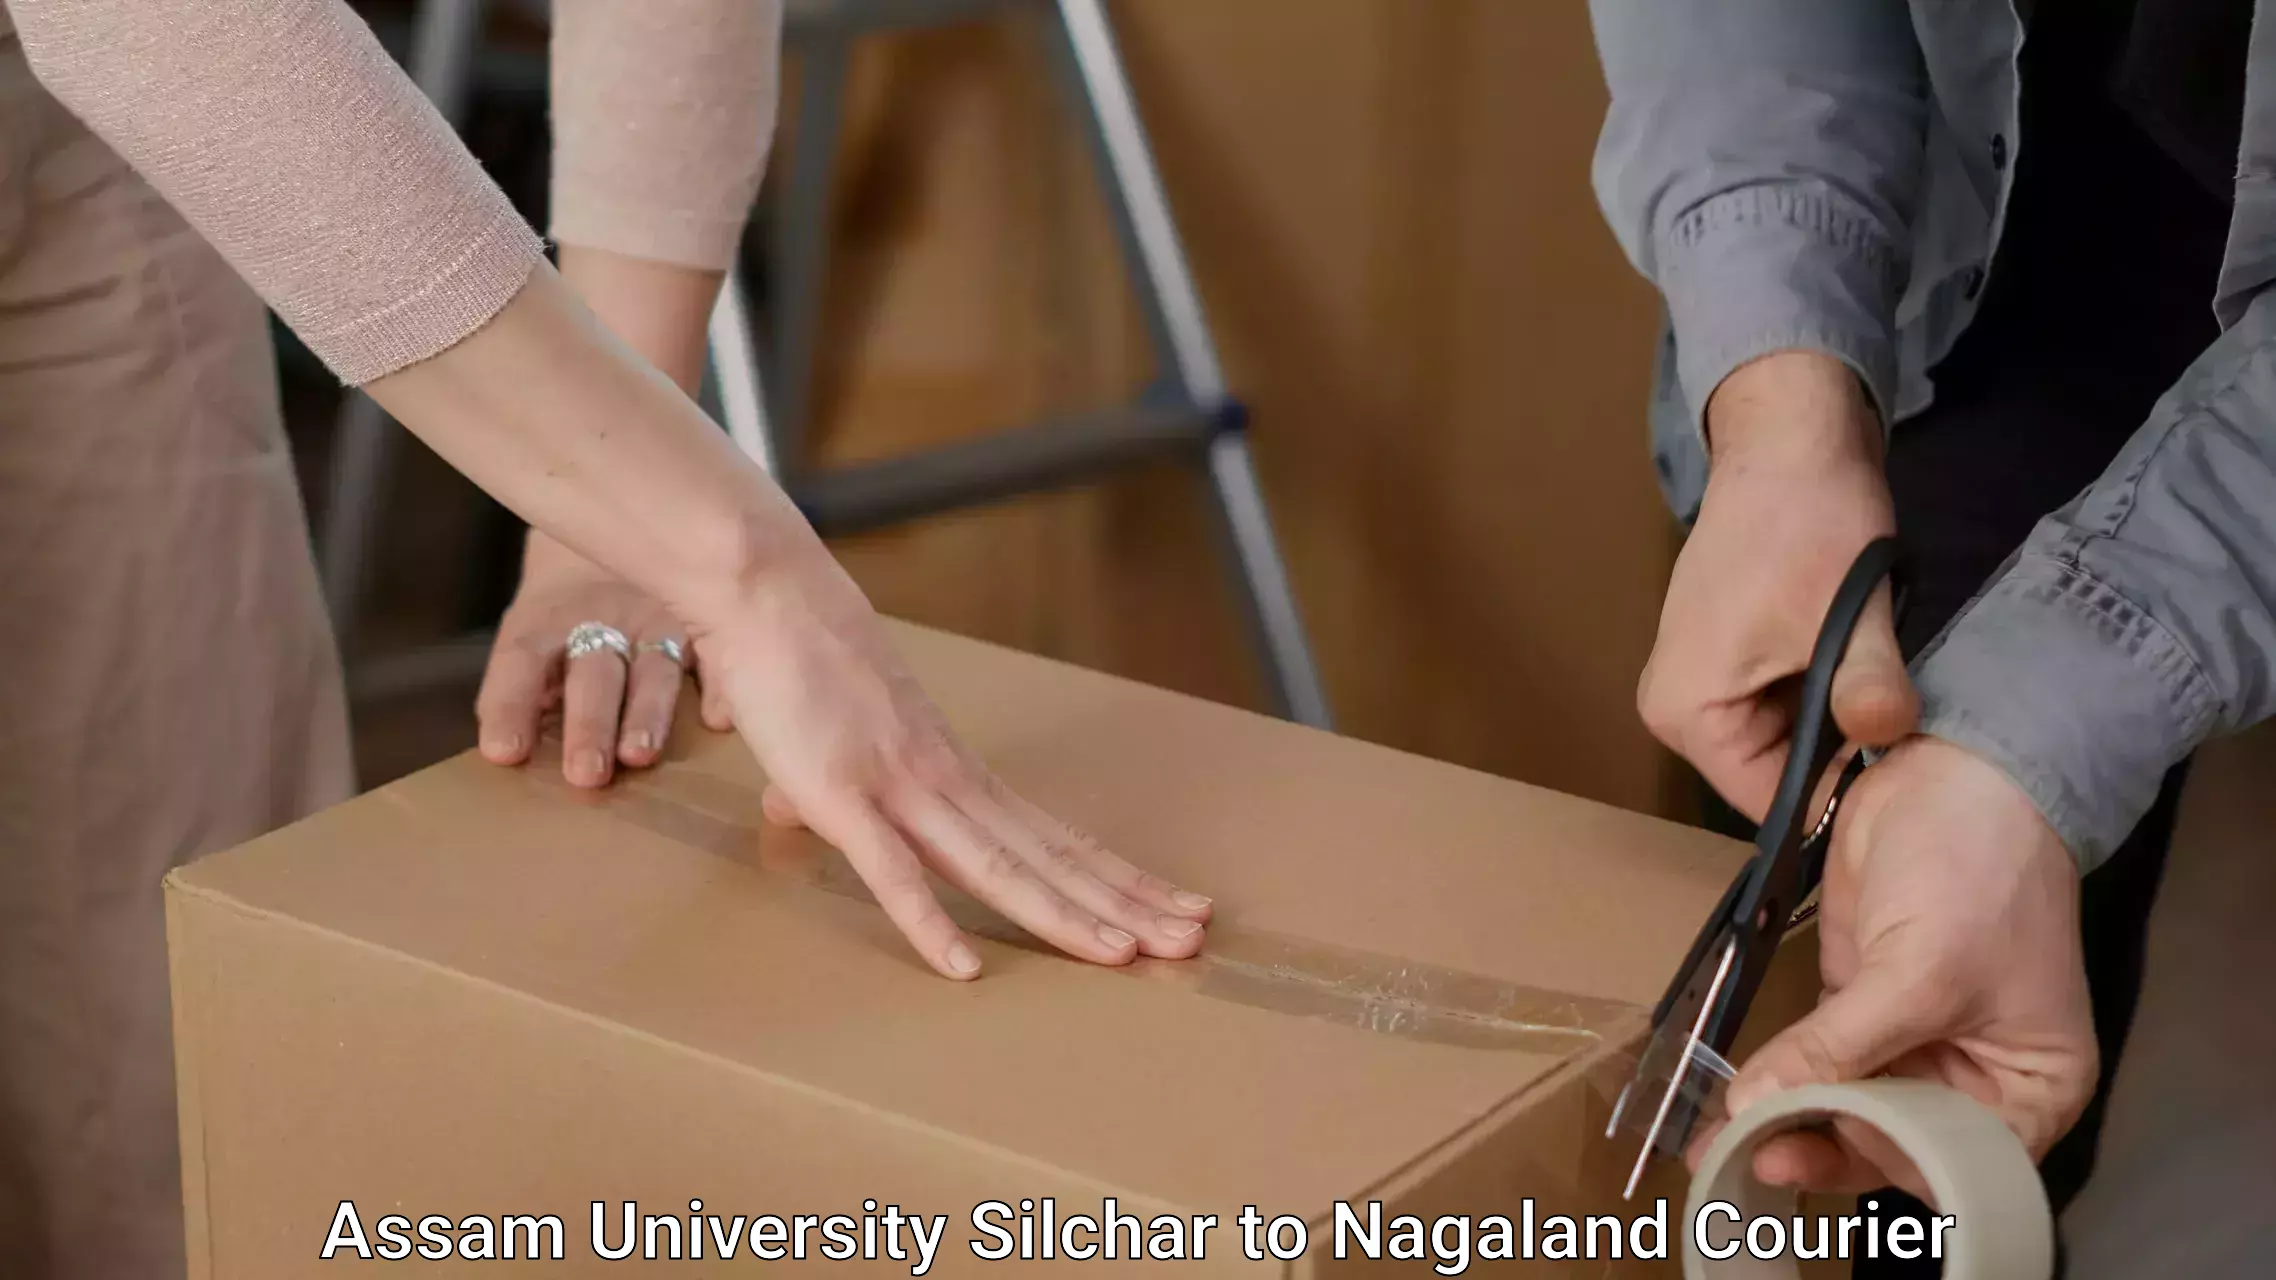 Furniture moving services in Assam University Silchar to Dimapur